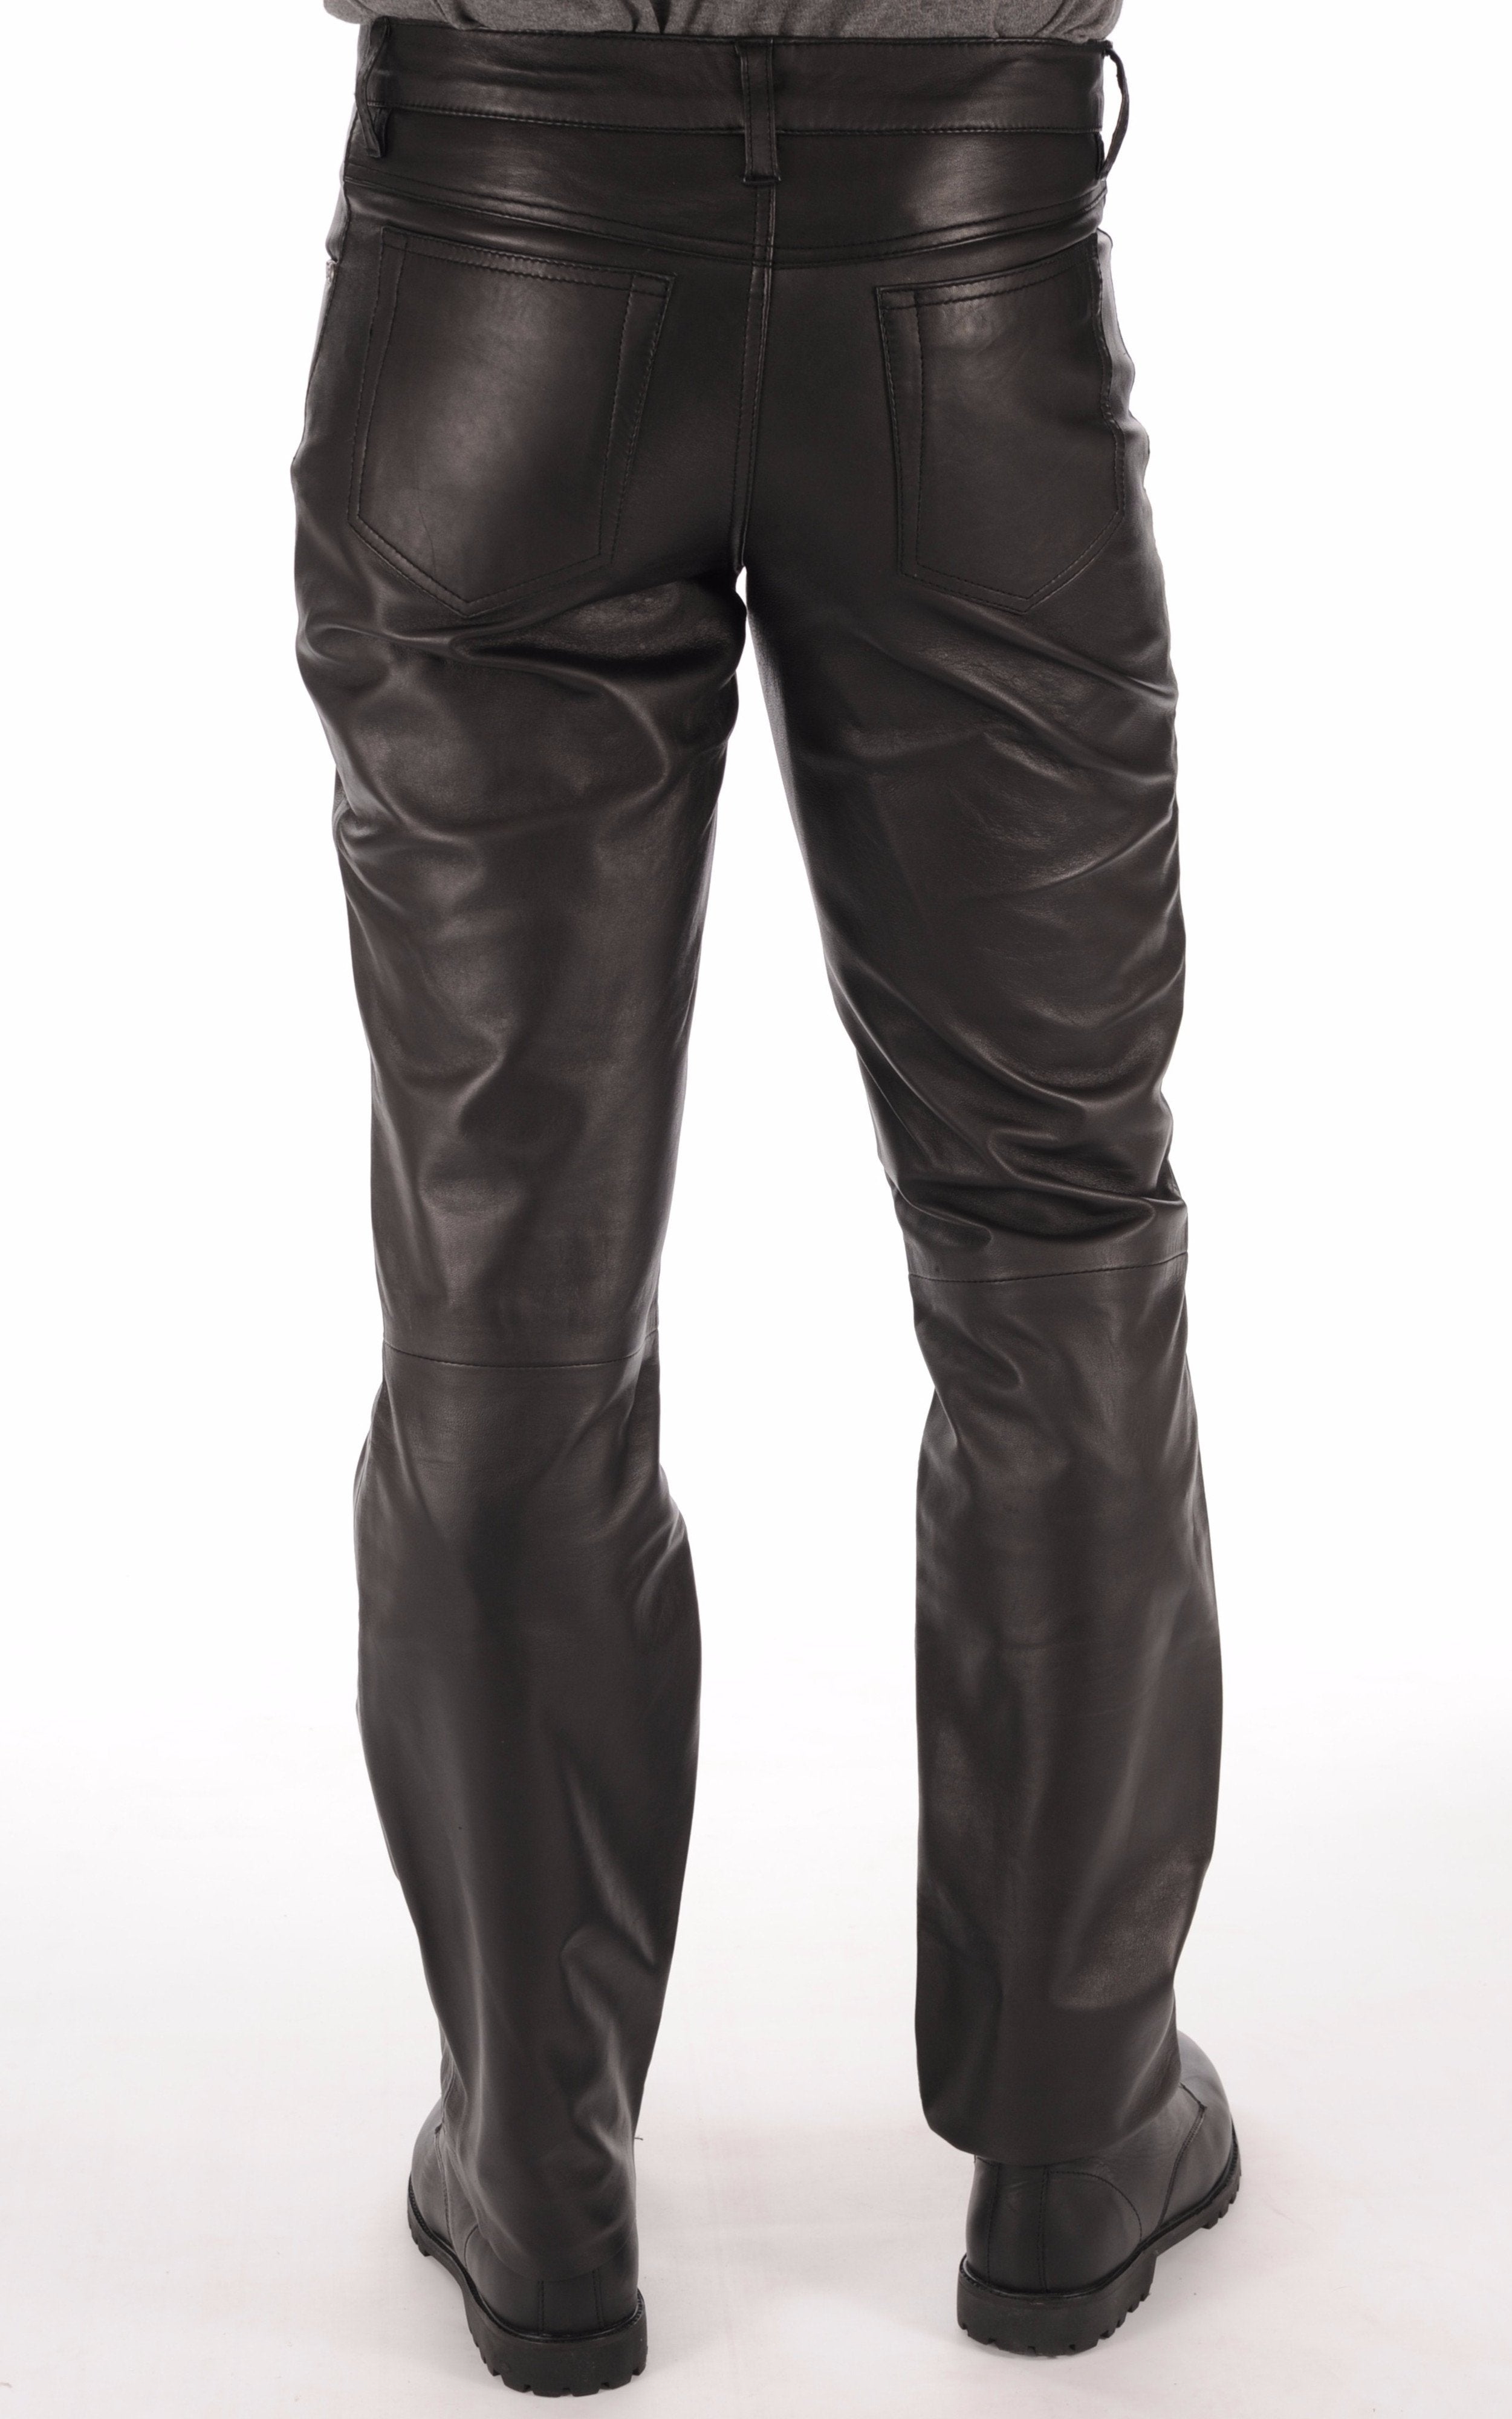 Leather Pants - Guide to Style, Fit, Care, and Designers